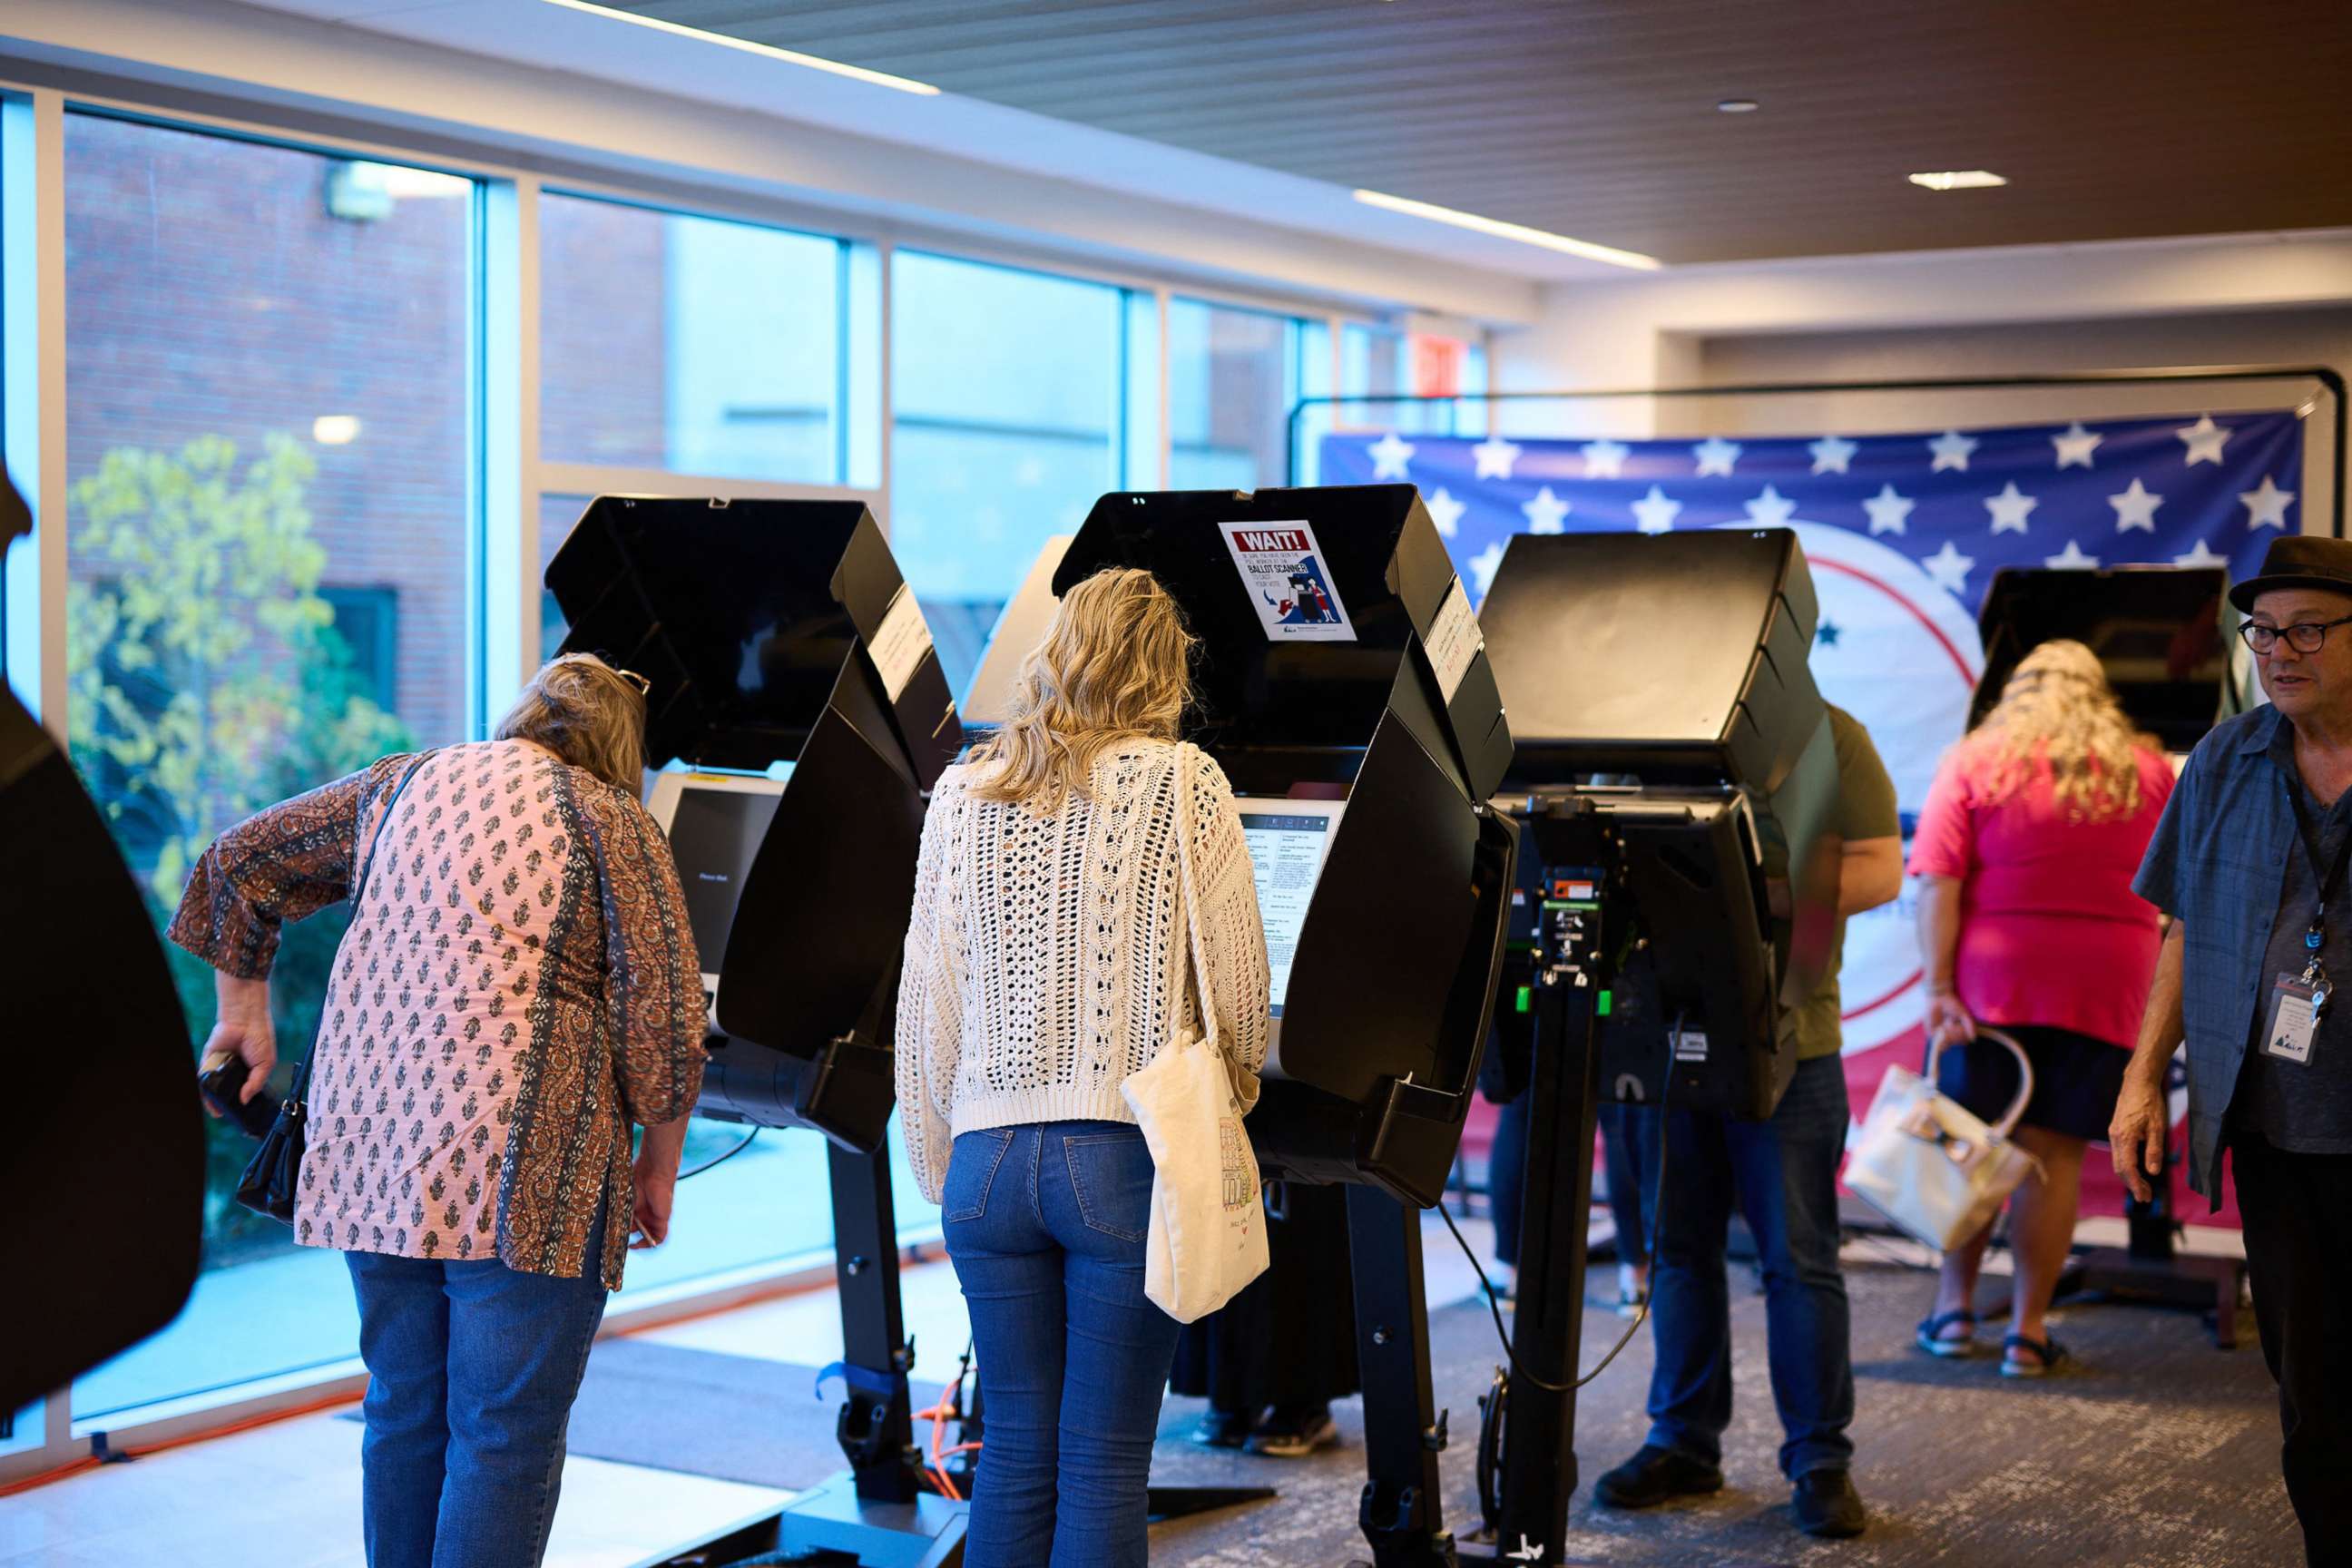 PHOTO: Voters cast their ballots at the Lake County Board of Elections headquarters in Painesville, Ohio, on Nov. 6, during early voting for the 2022 midterm elections.